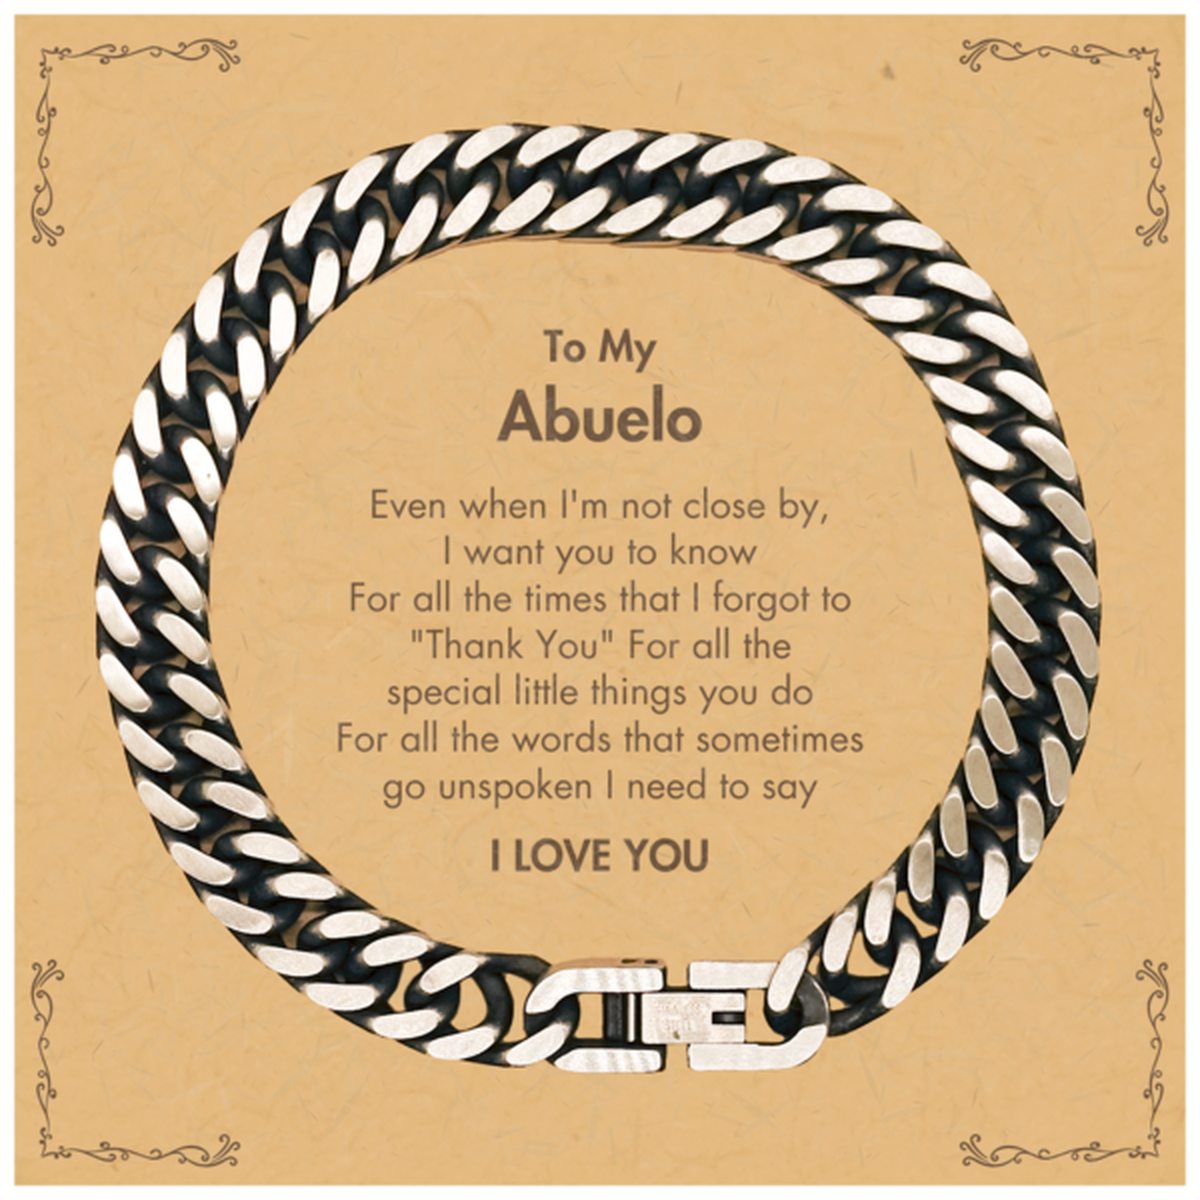 Thank You Gifts for Abuelo, Keepsake Cuban Link Chain Bracelet Gifts for Abuelo Birthday Mother's day Father's Day Abuelo For all the words That sometimes go unspoken I need to say I LOVE YOU